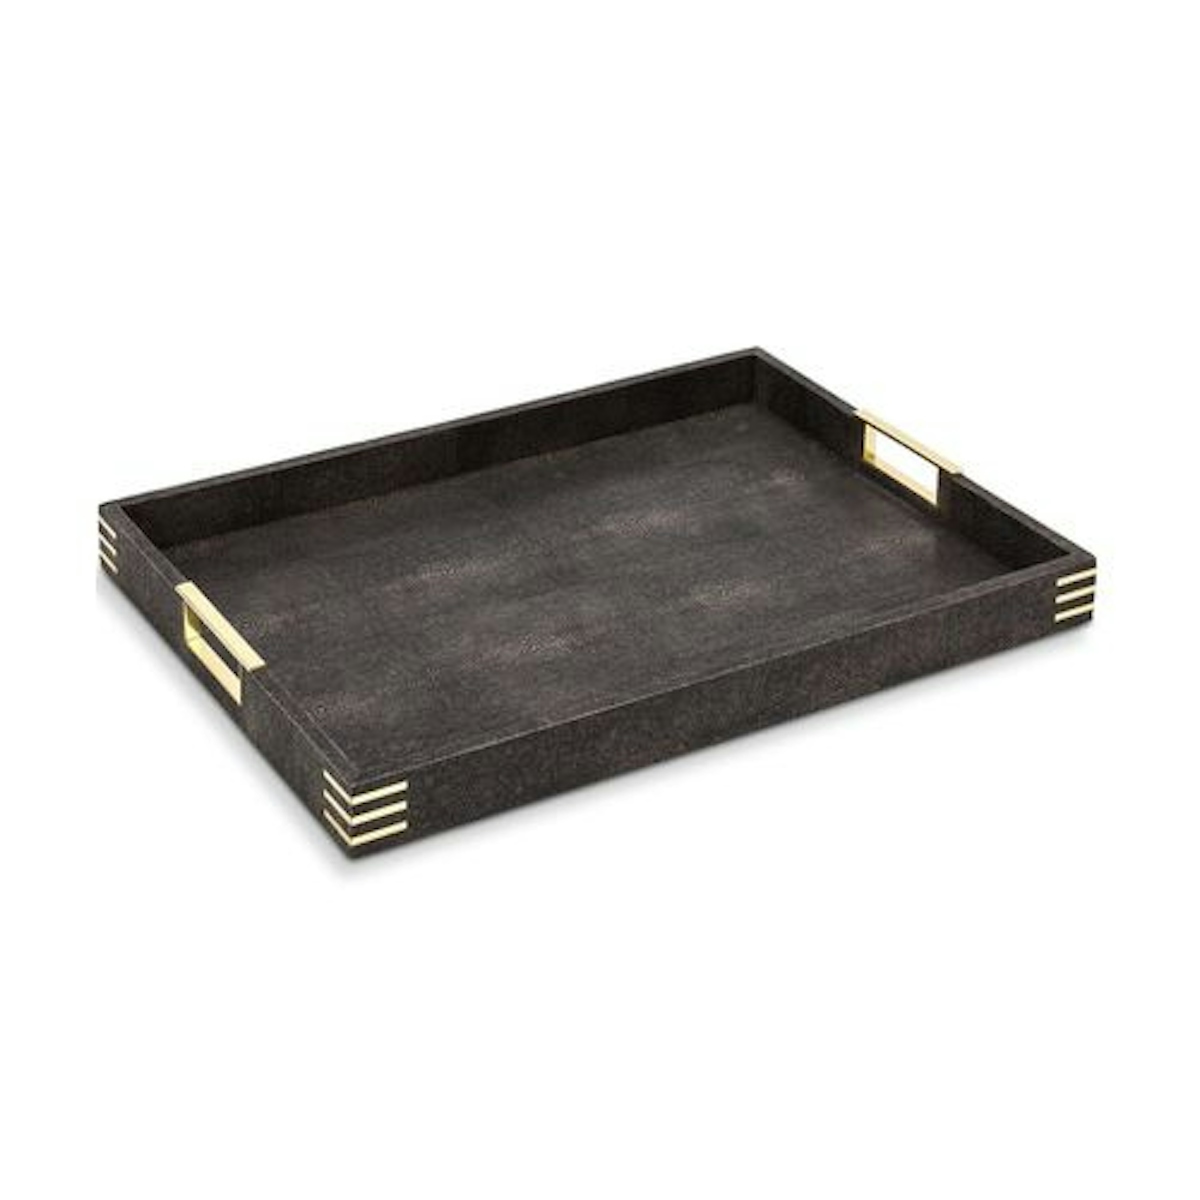 Holmes Shagreen Tray - 21 Best Decorative Trays To Buy For Your Tabletop - LuxDeco.com